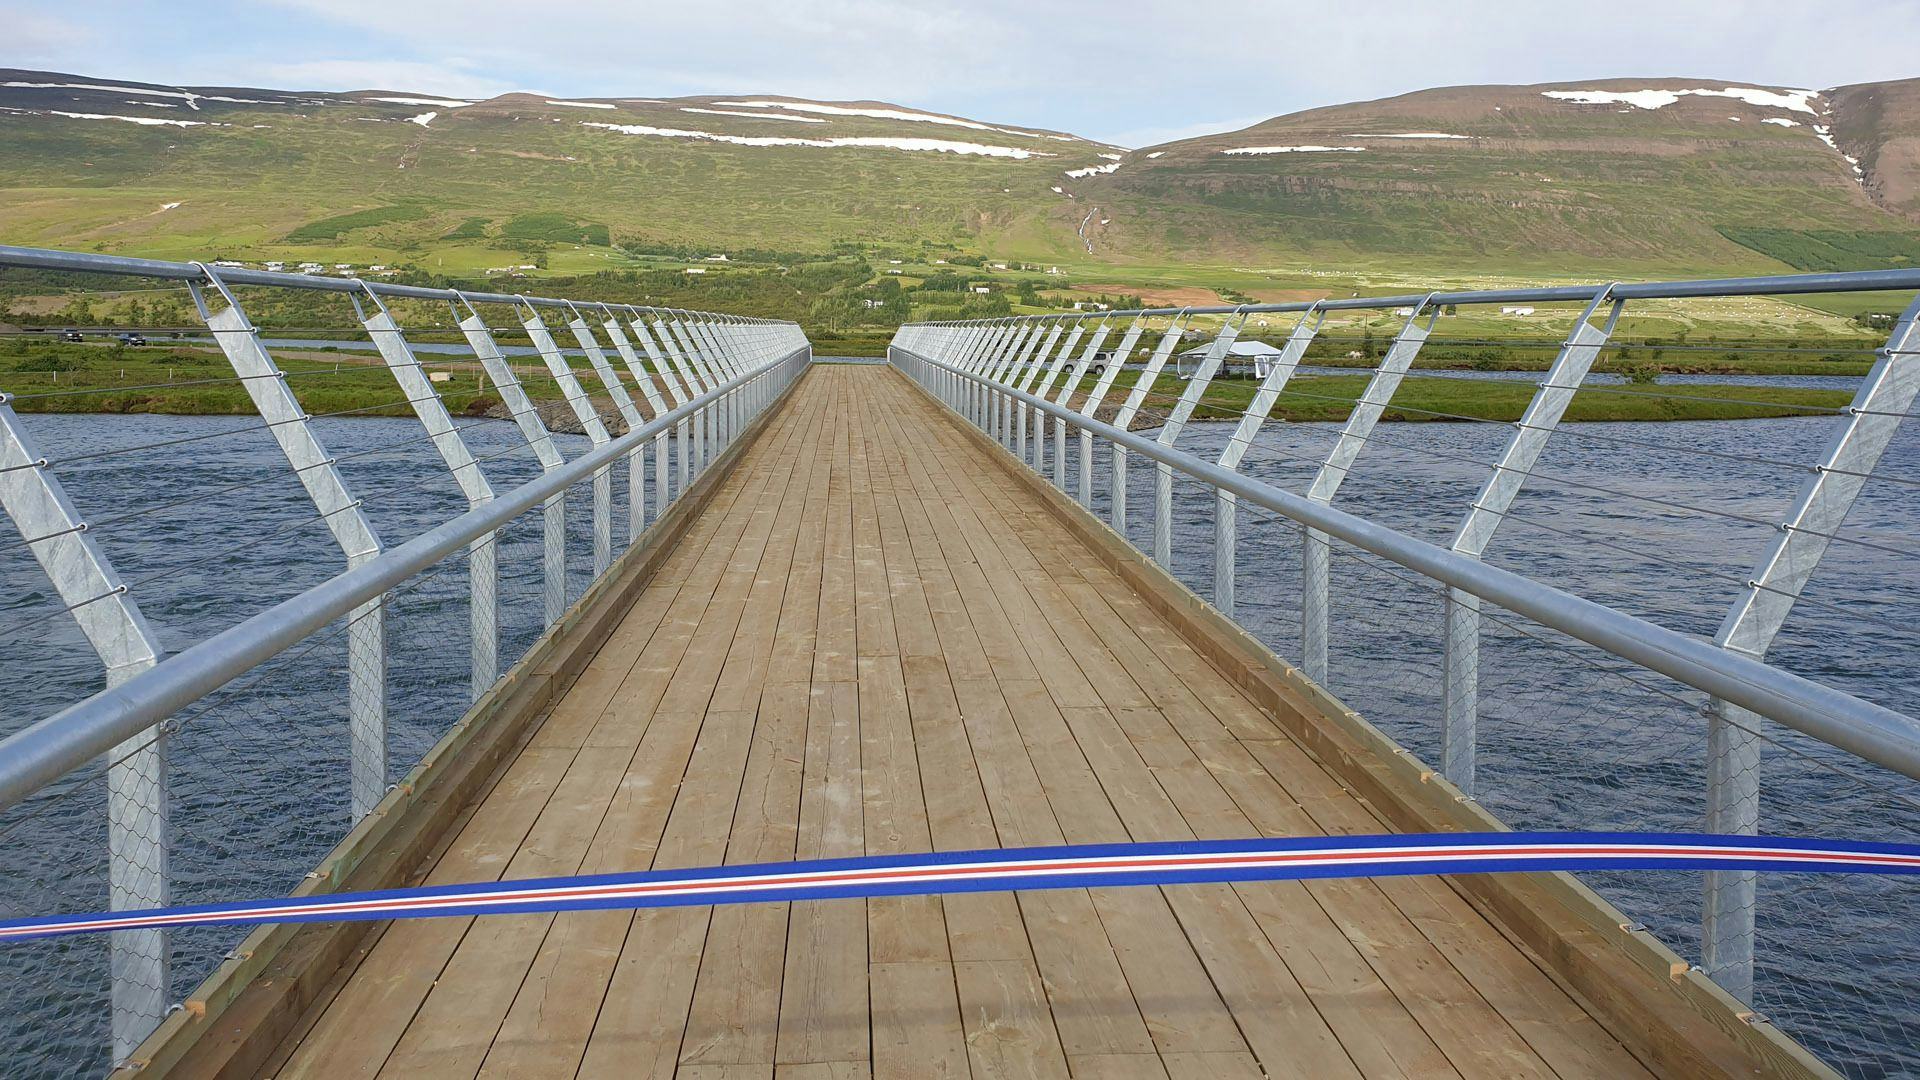 A wooden bridge with metal railings leading towards a hilly landscape